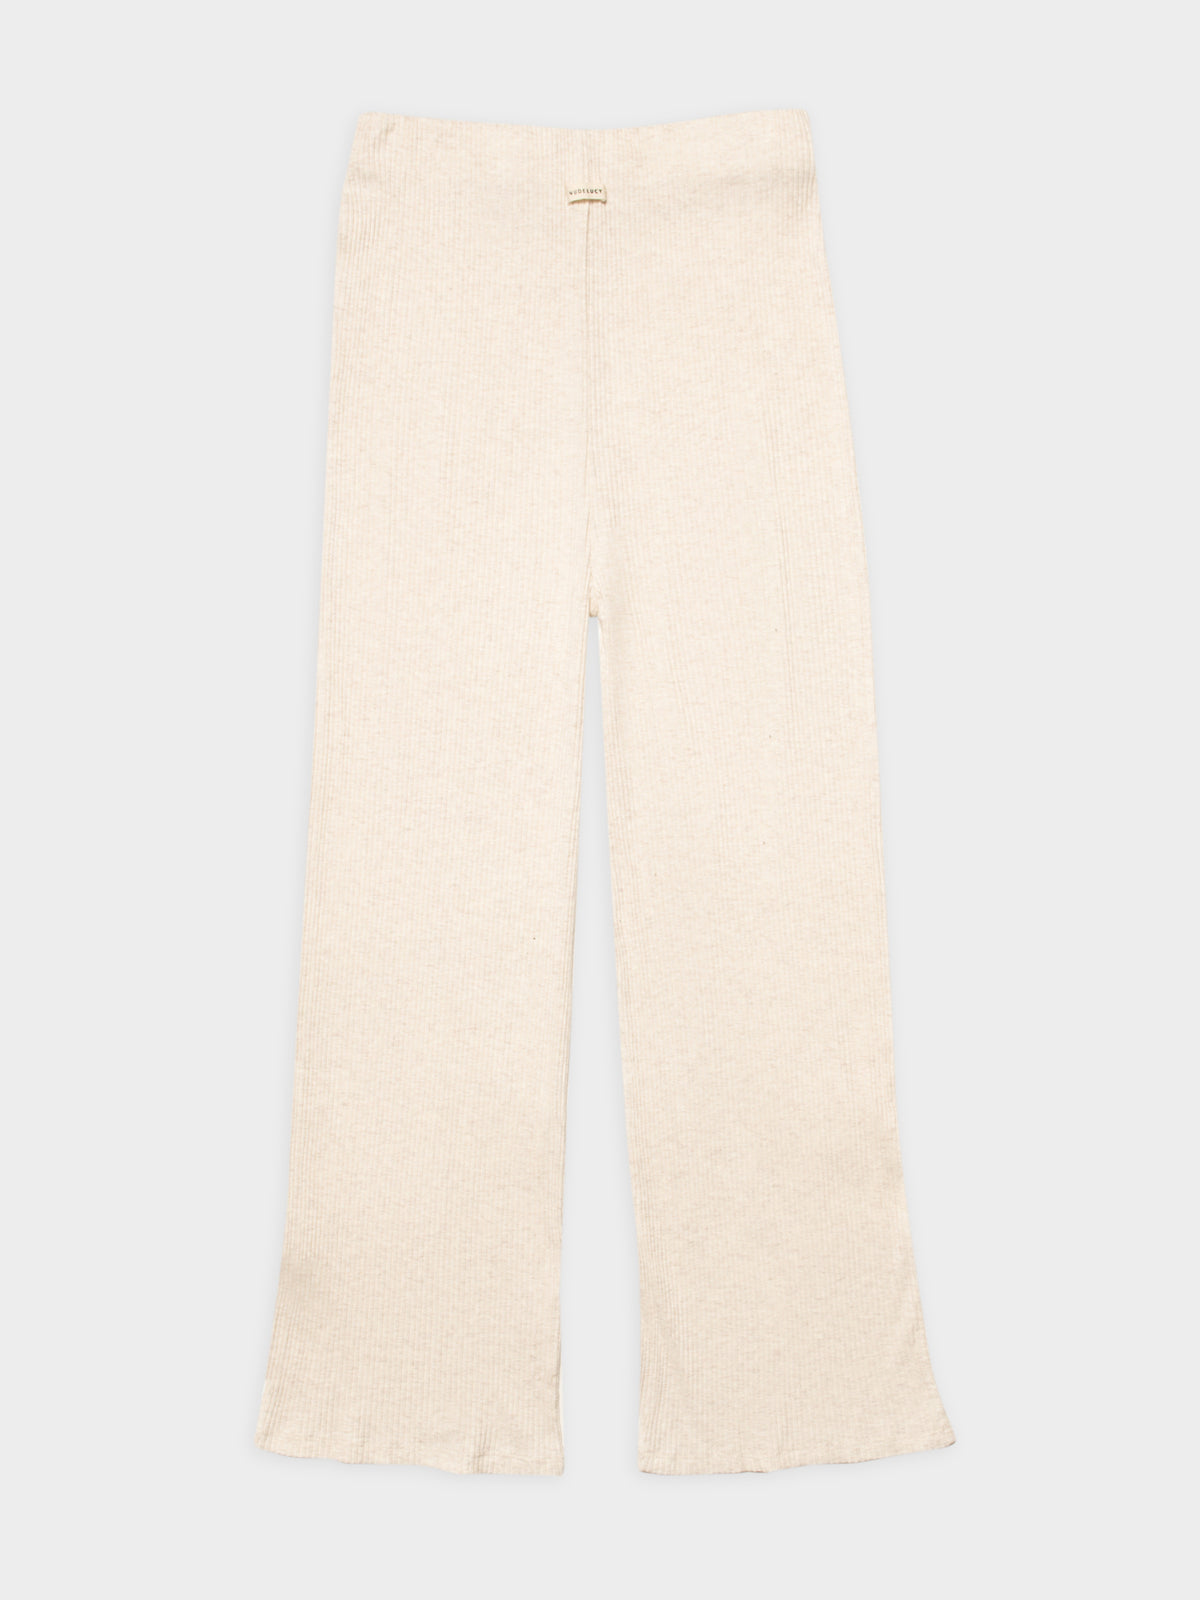 Ribbed Lounge Culotte in Cream Marle